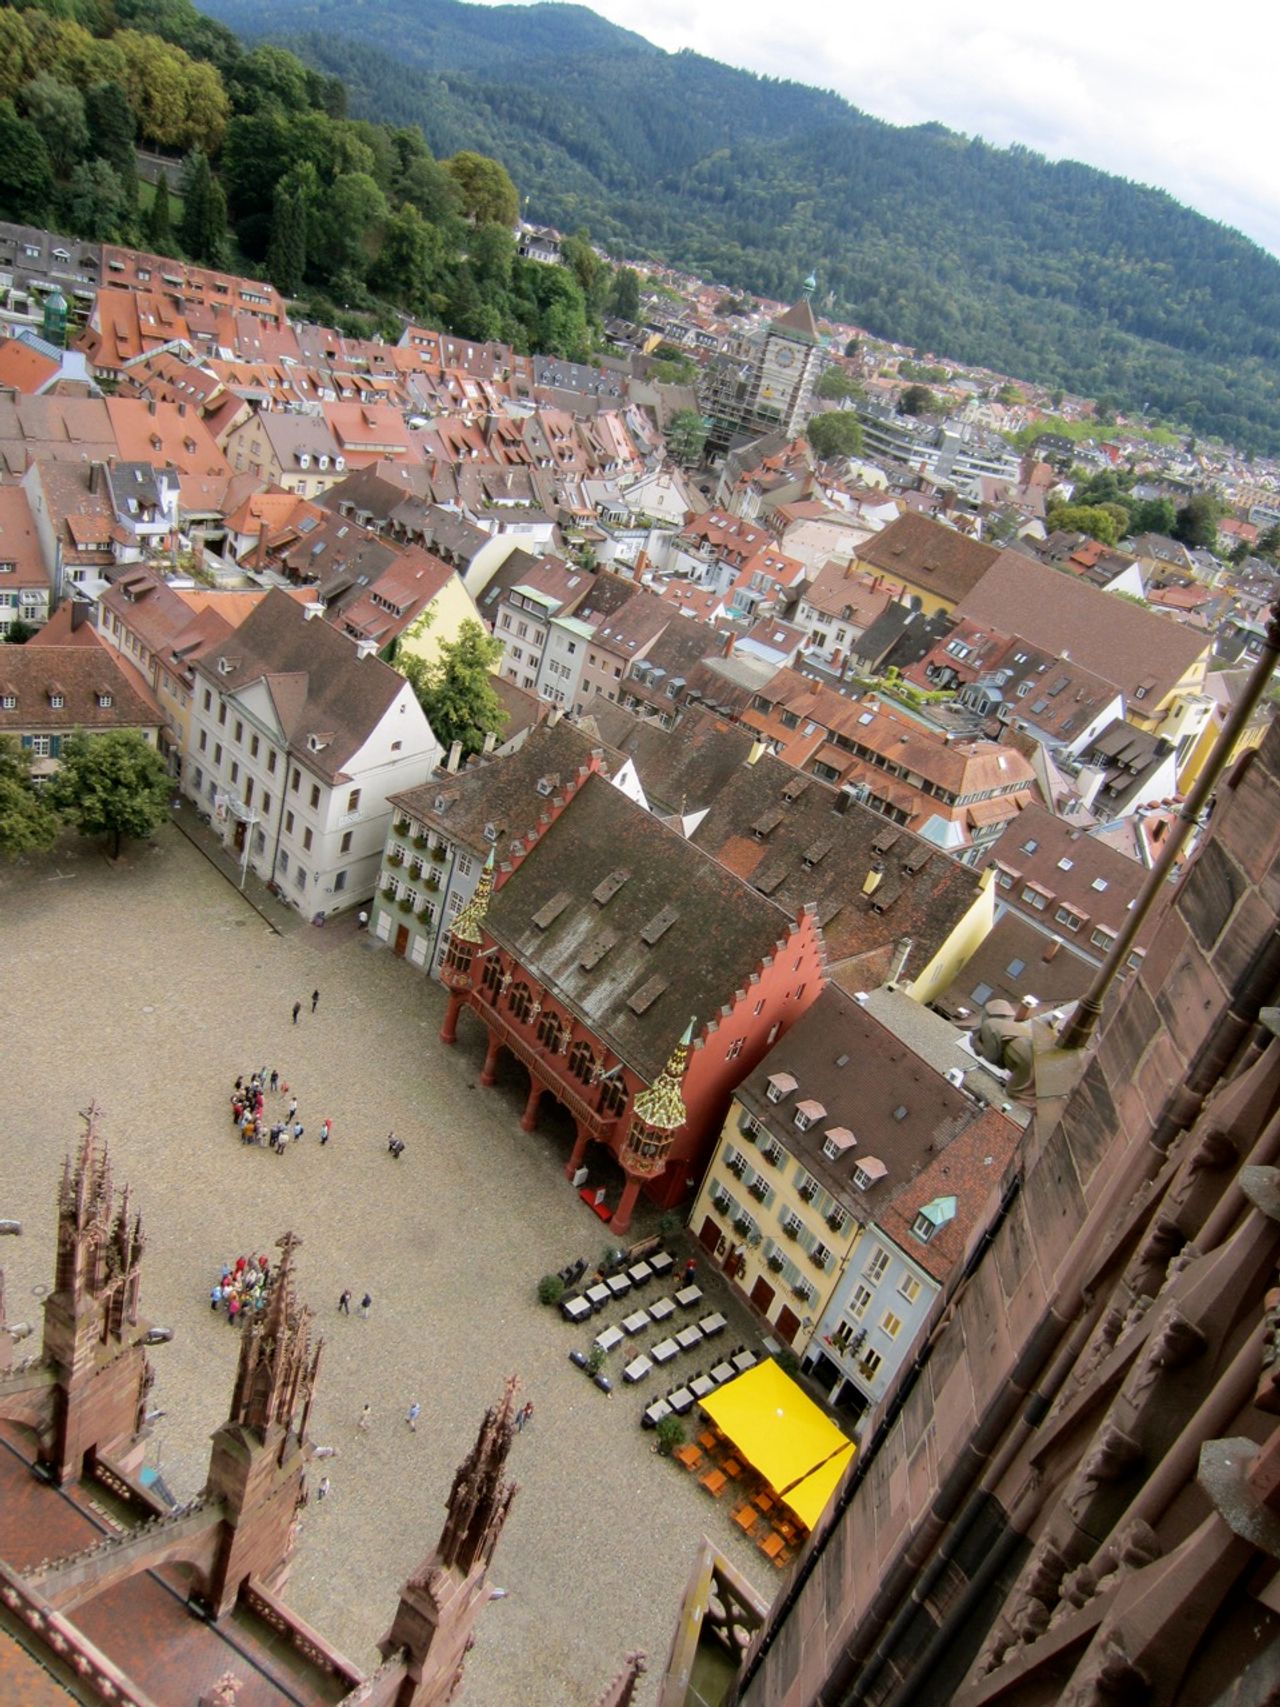 A birds-eye view of the city from the top of the Münster clock tower.